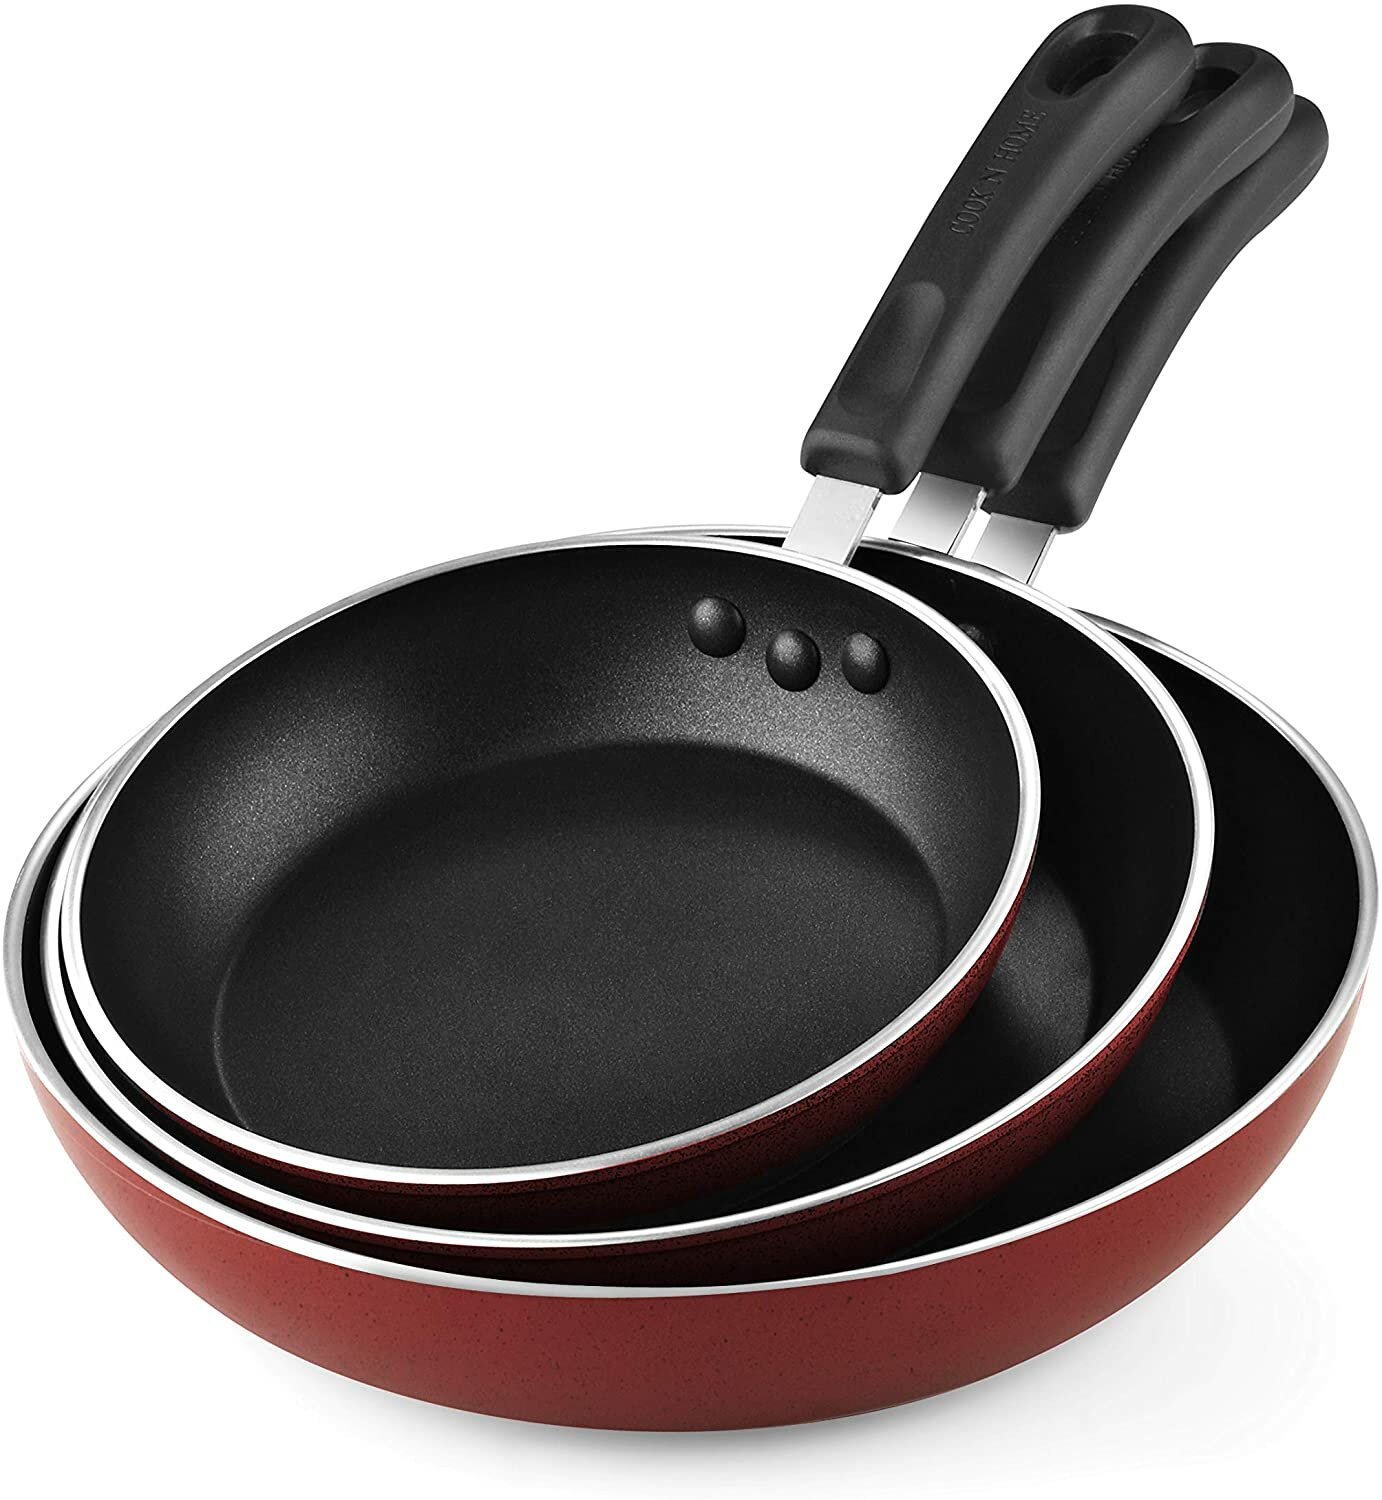 Details about   Carote 8 Inch Nonstick Skillet Frying Pan Egg Skillet Omelet Pan Nonstick Cookw 